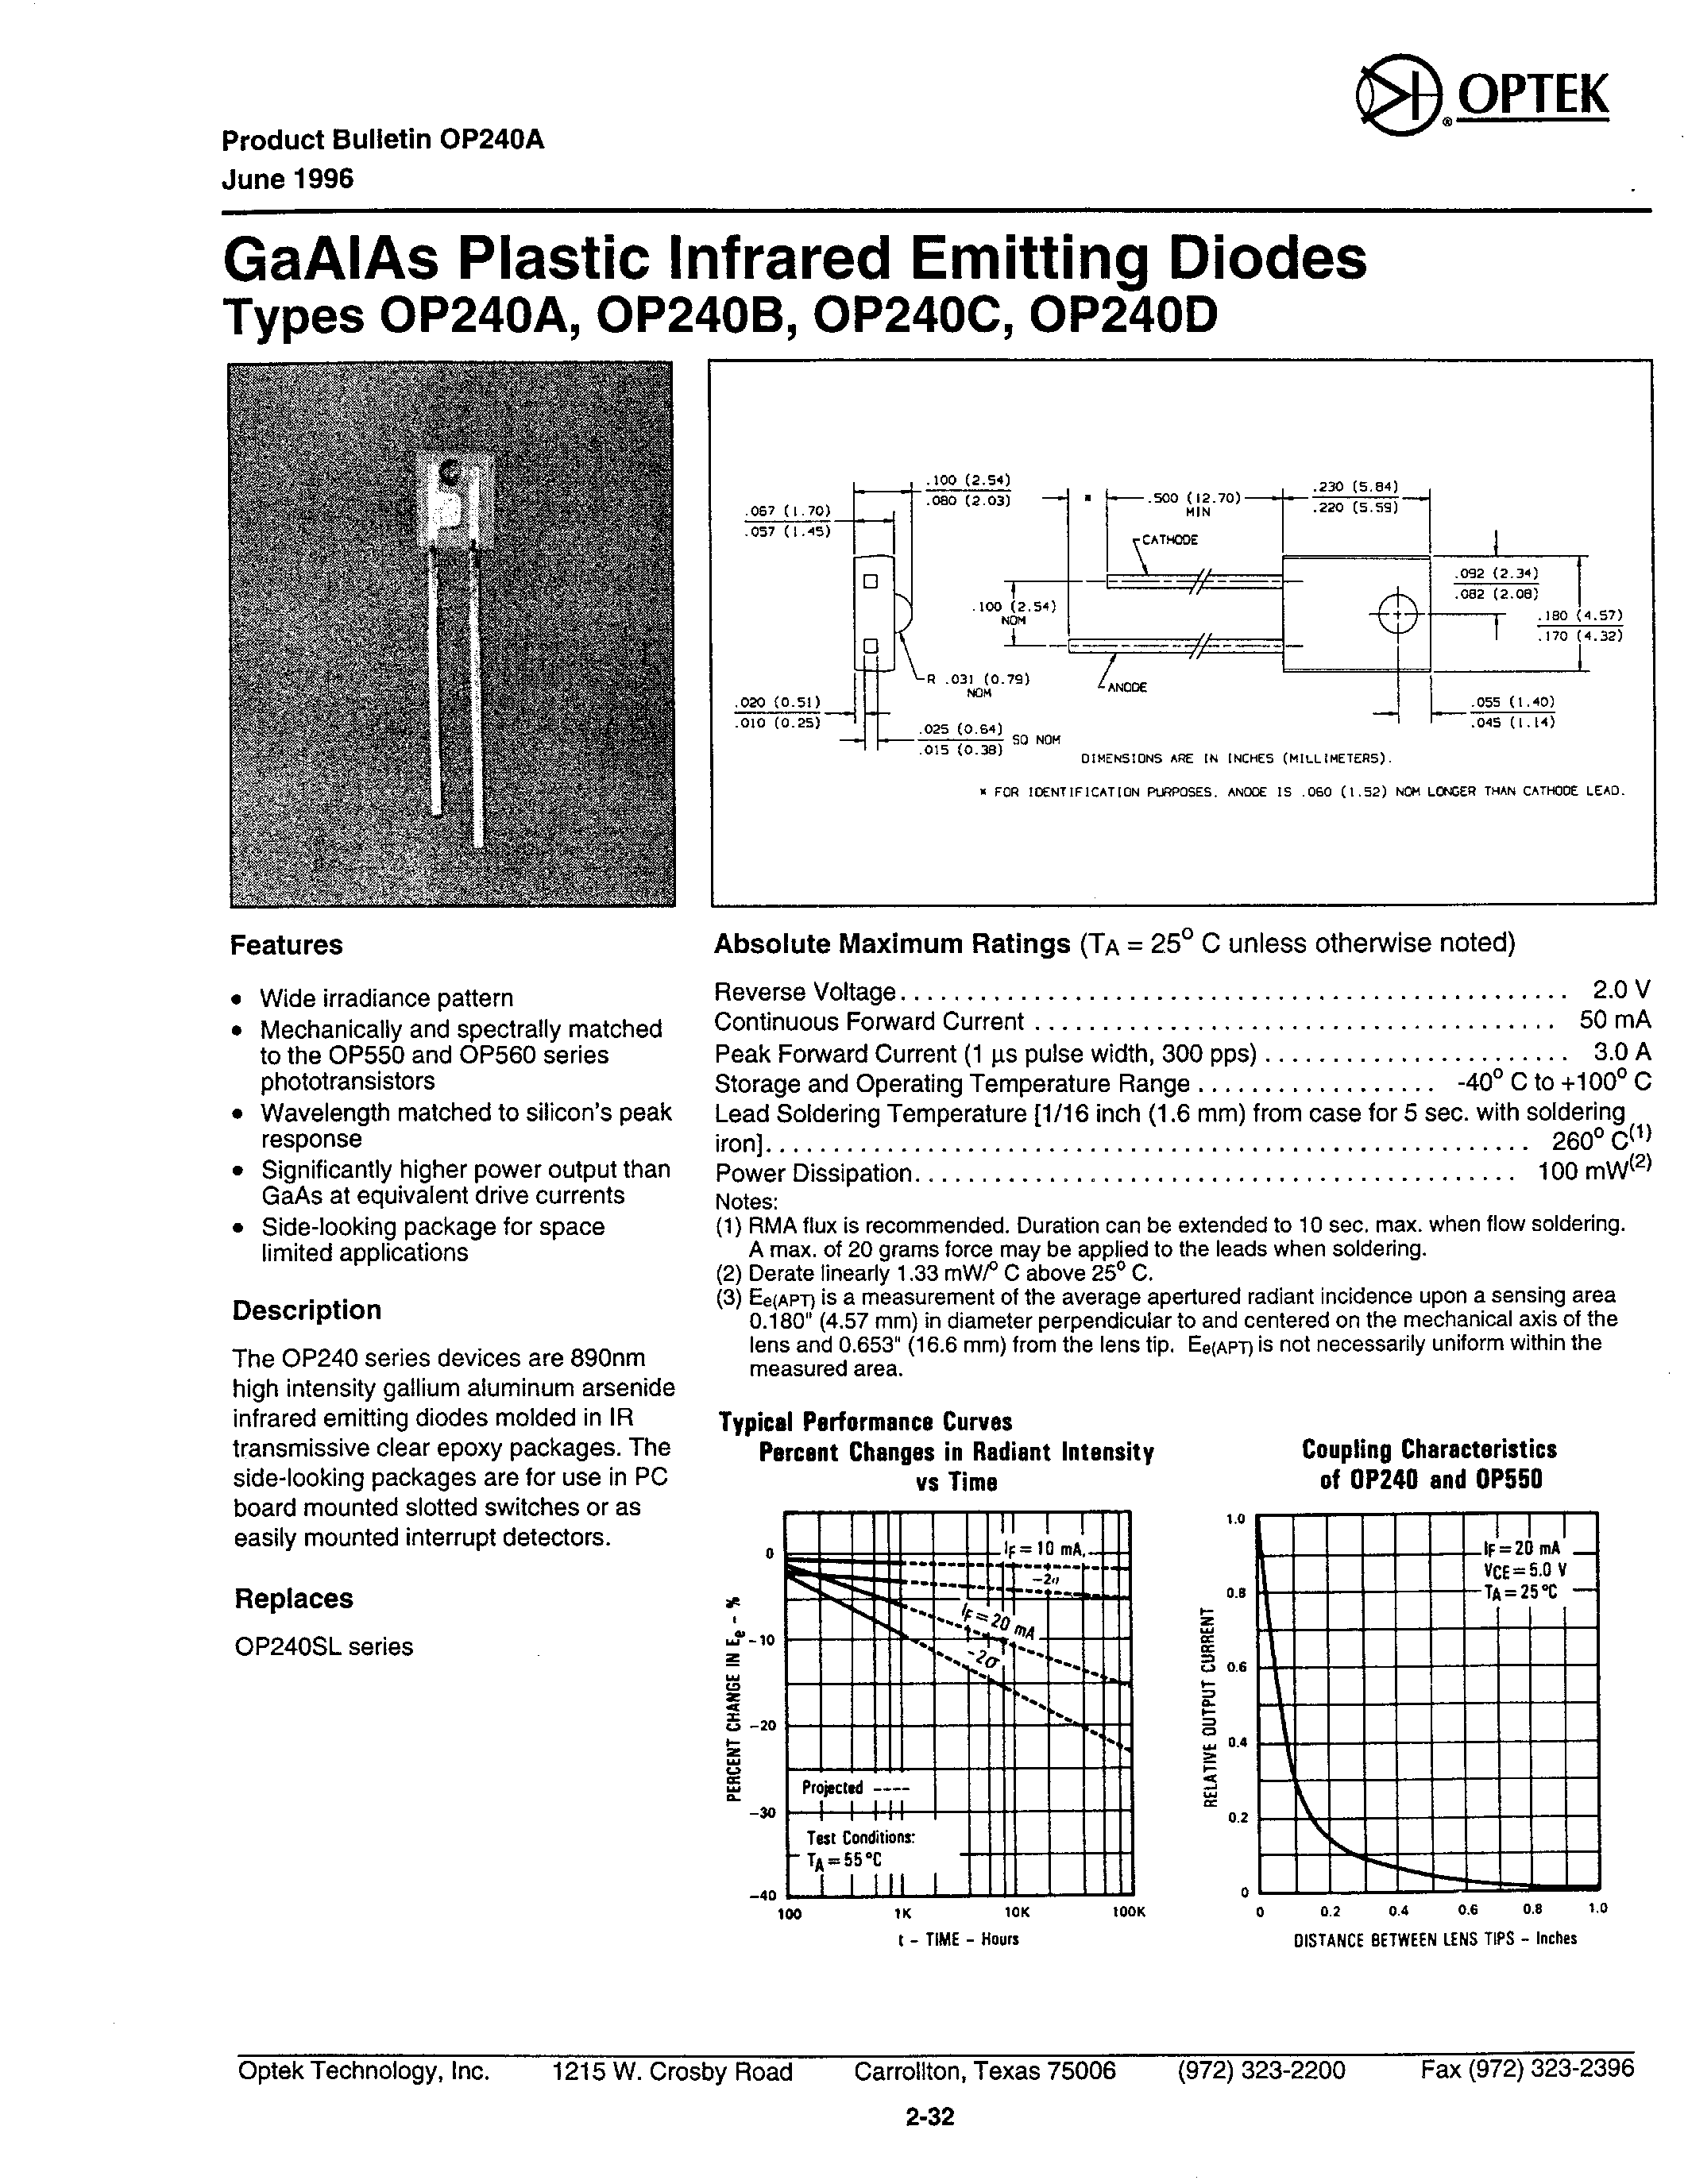 Даташит OP240A - GAAIAS PLASTIC INFRARED EMITTING DIODES страница 1